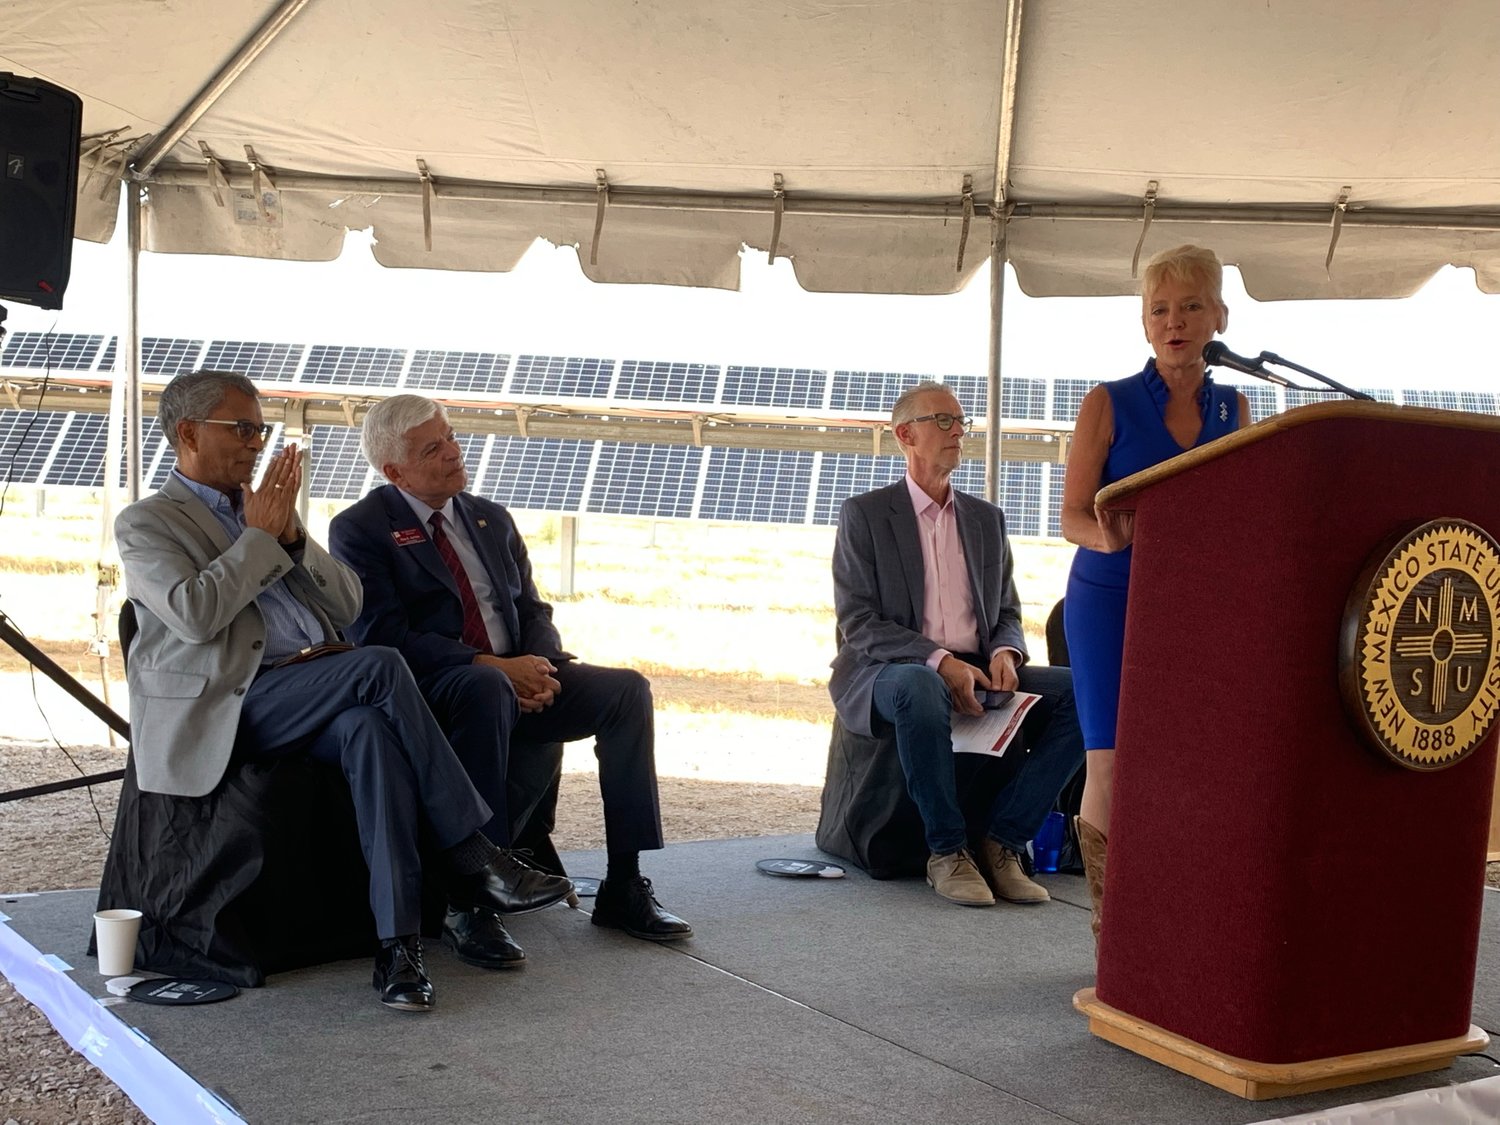 El Paso Electric President and CEO Kelly Tomblin speaks at the opening event for Aggie Power Sept. 23. Seated behind Tomblin are Lakshmi Reddi, dean of the College of Engineering; NMSU Chancellor Dan Arvizu; and Wayne Savage, executive director of the Arrowhead Research Park.